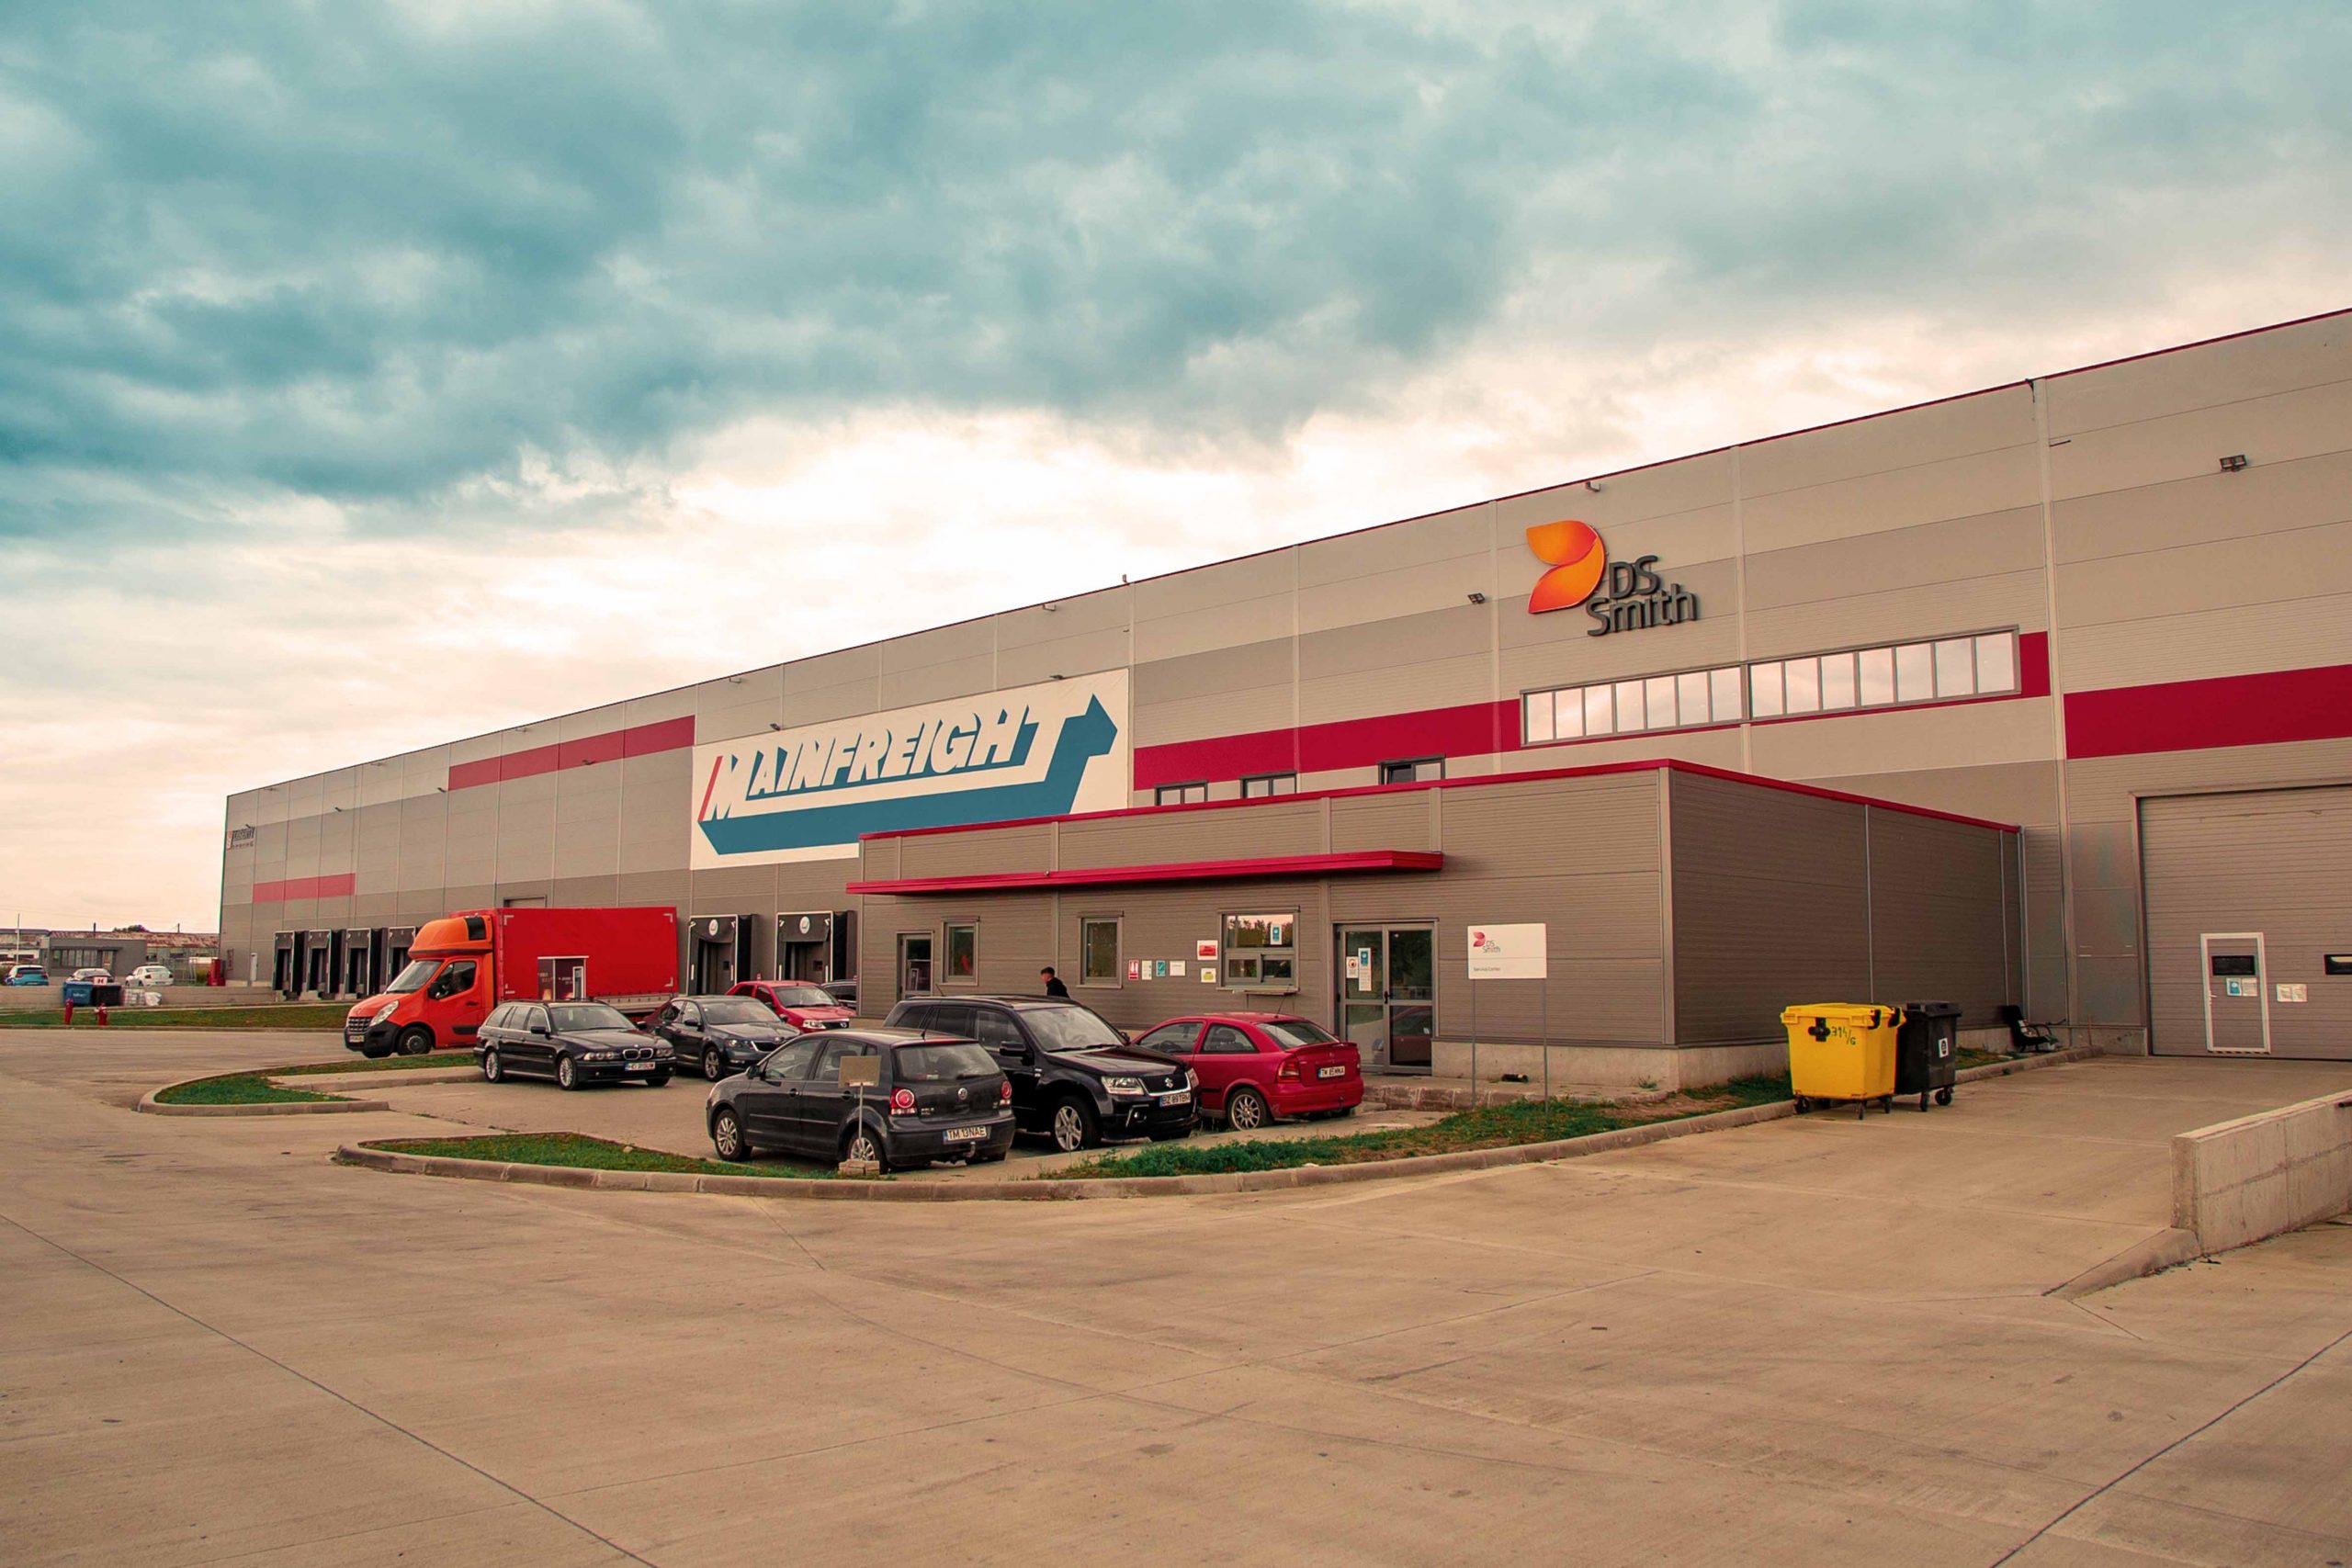 Mainfreight, the global supply chain leading company, opened a distribution hub in Timișoara Industrial Park(II), a project developed by Global Vision and Globalworth